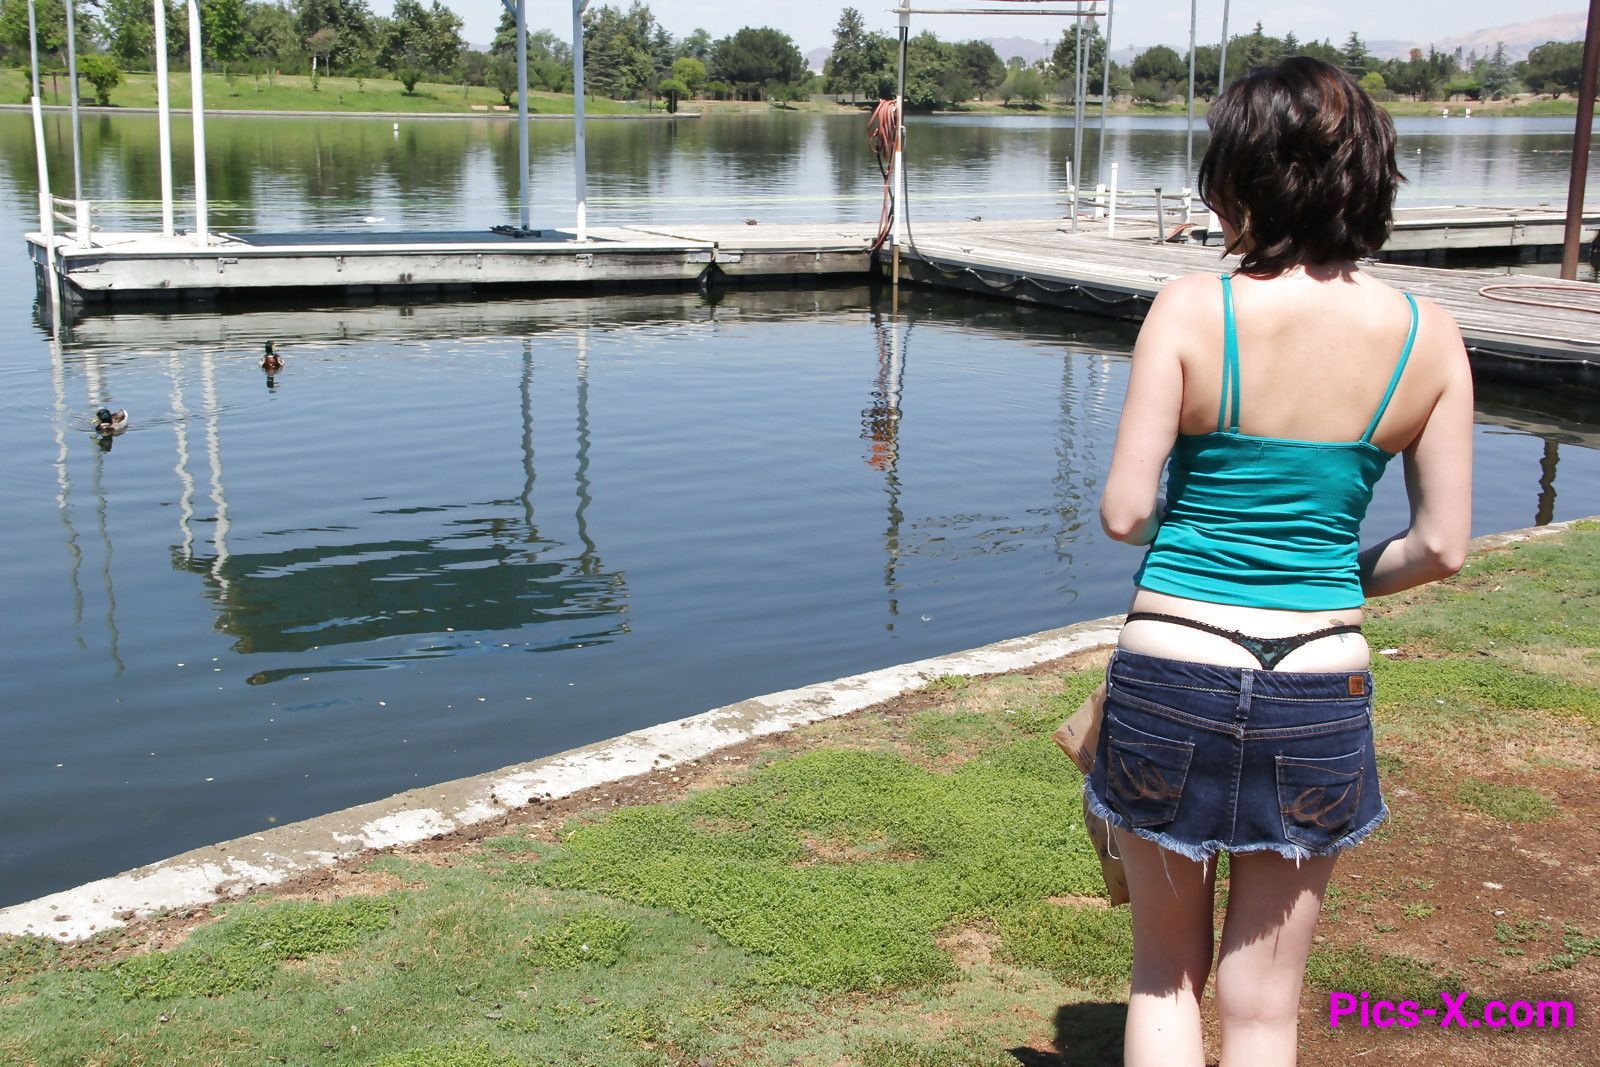 Pervy Bird Watcher Spies a Hot Panty Slut at the Park! - Whale Tail'n - Image 2